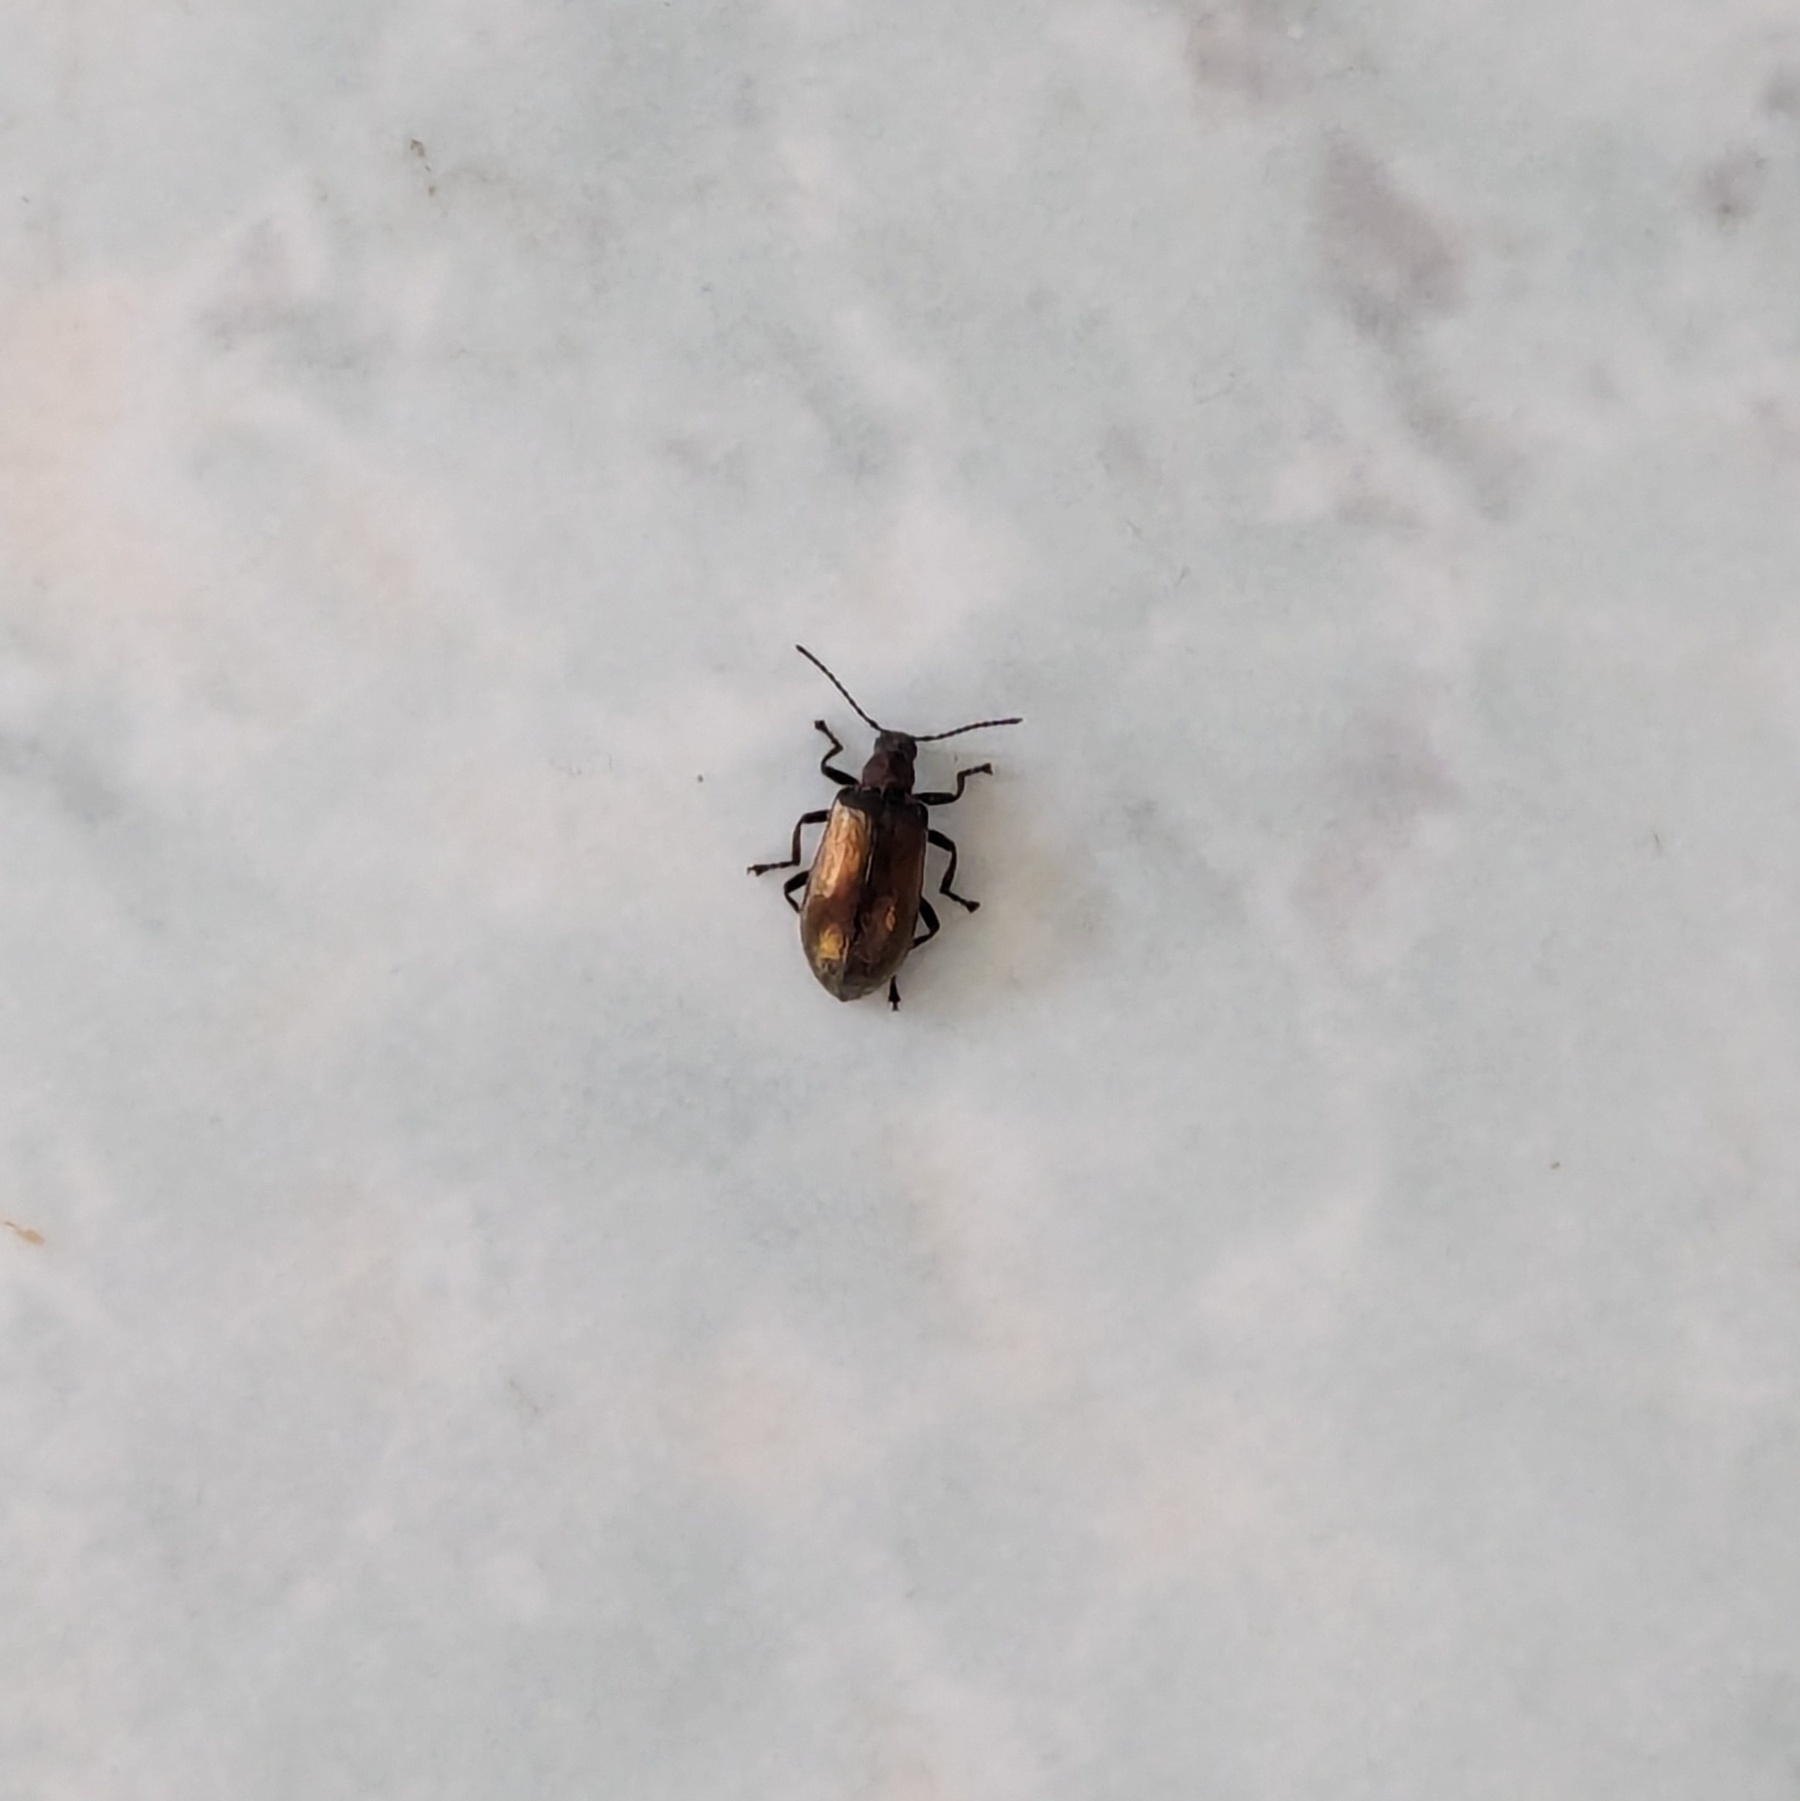 A beetle with a copper shell on a tiled floor 